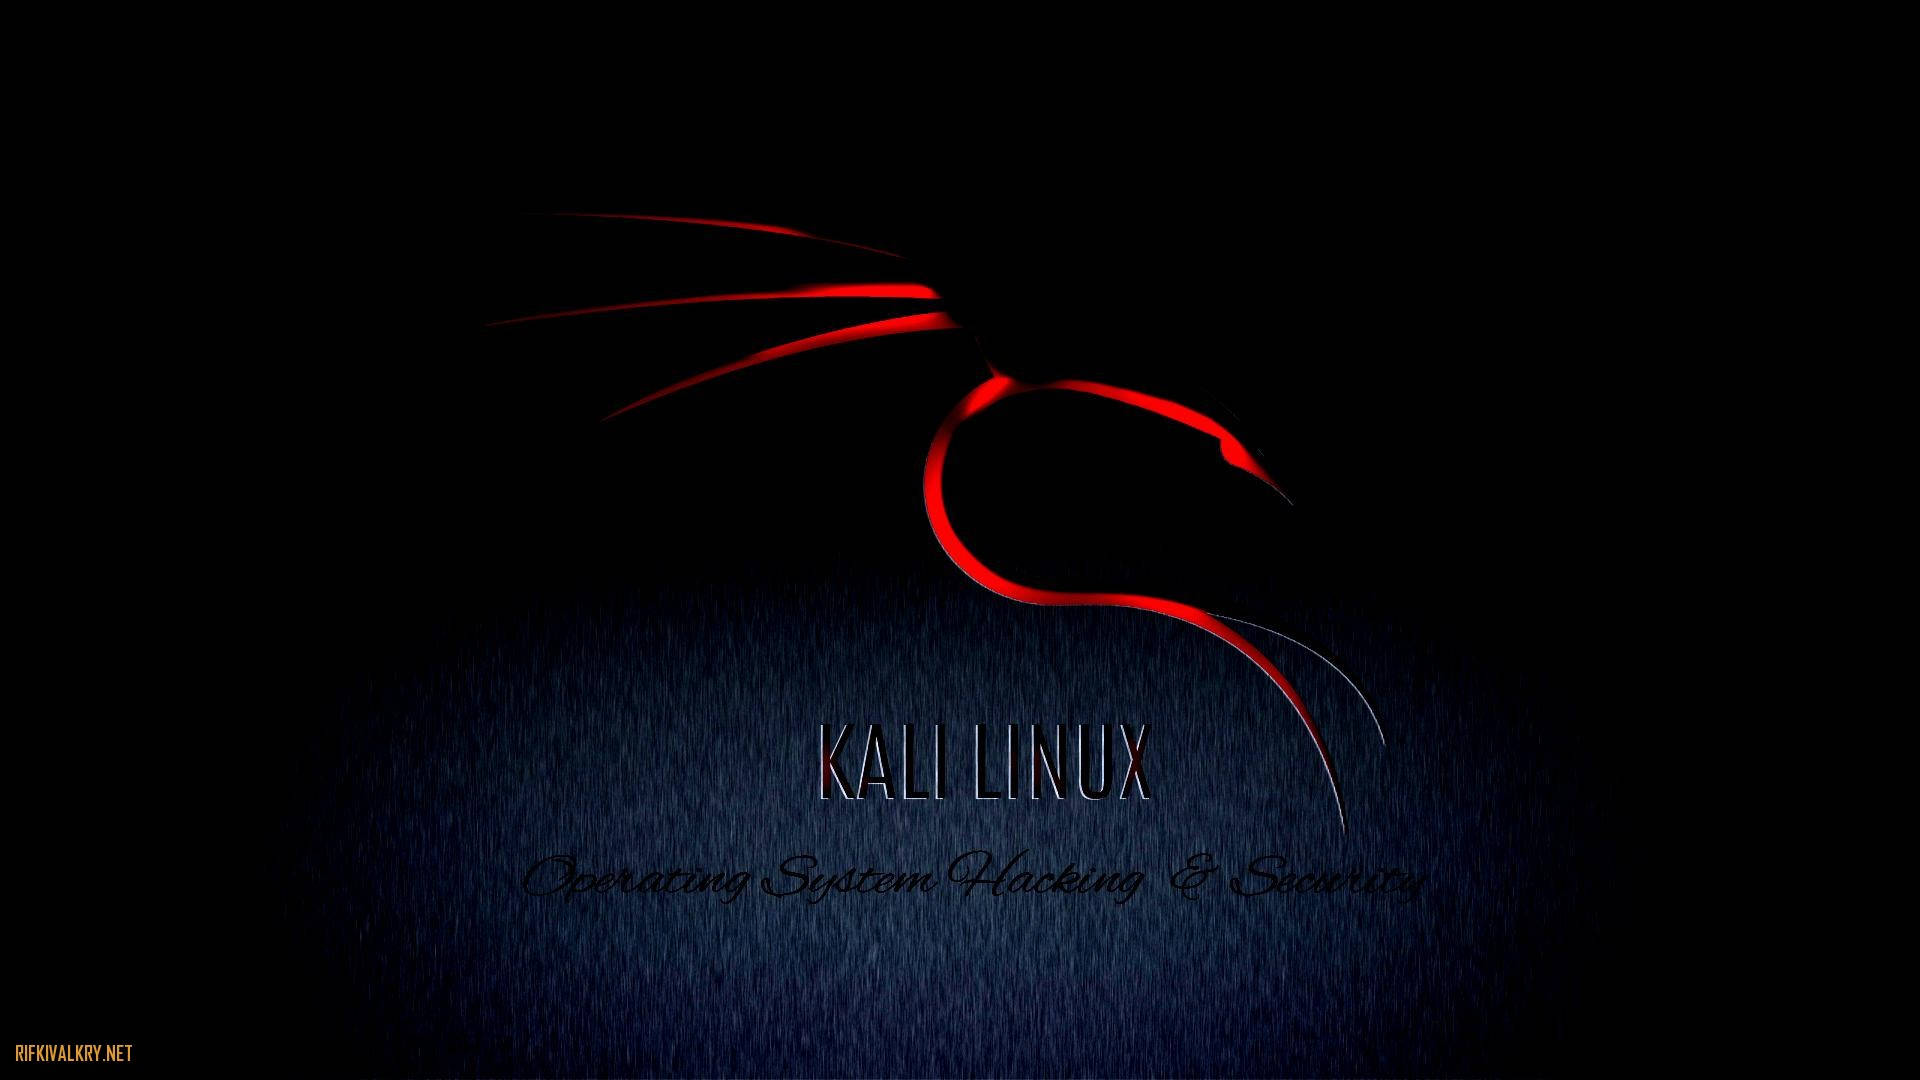 Black And Red Kali Linux